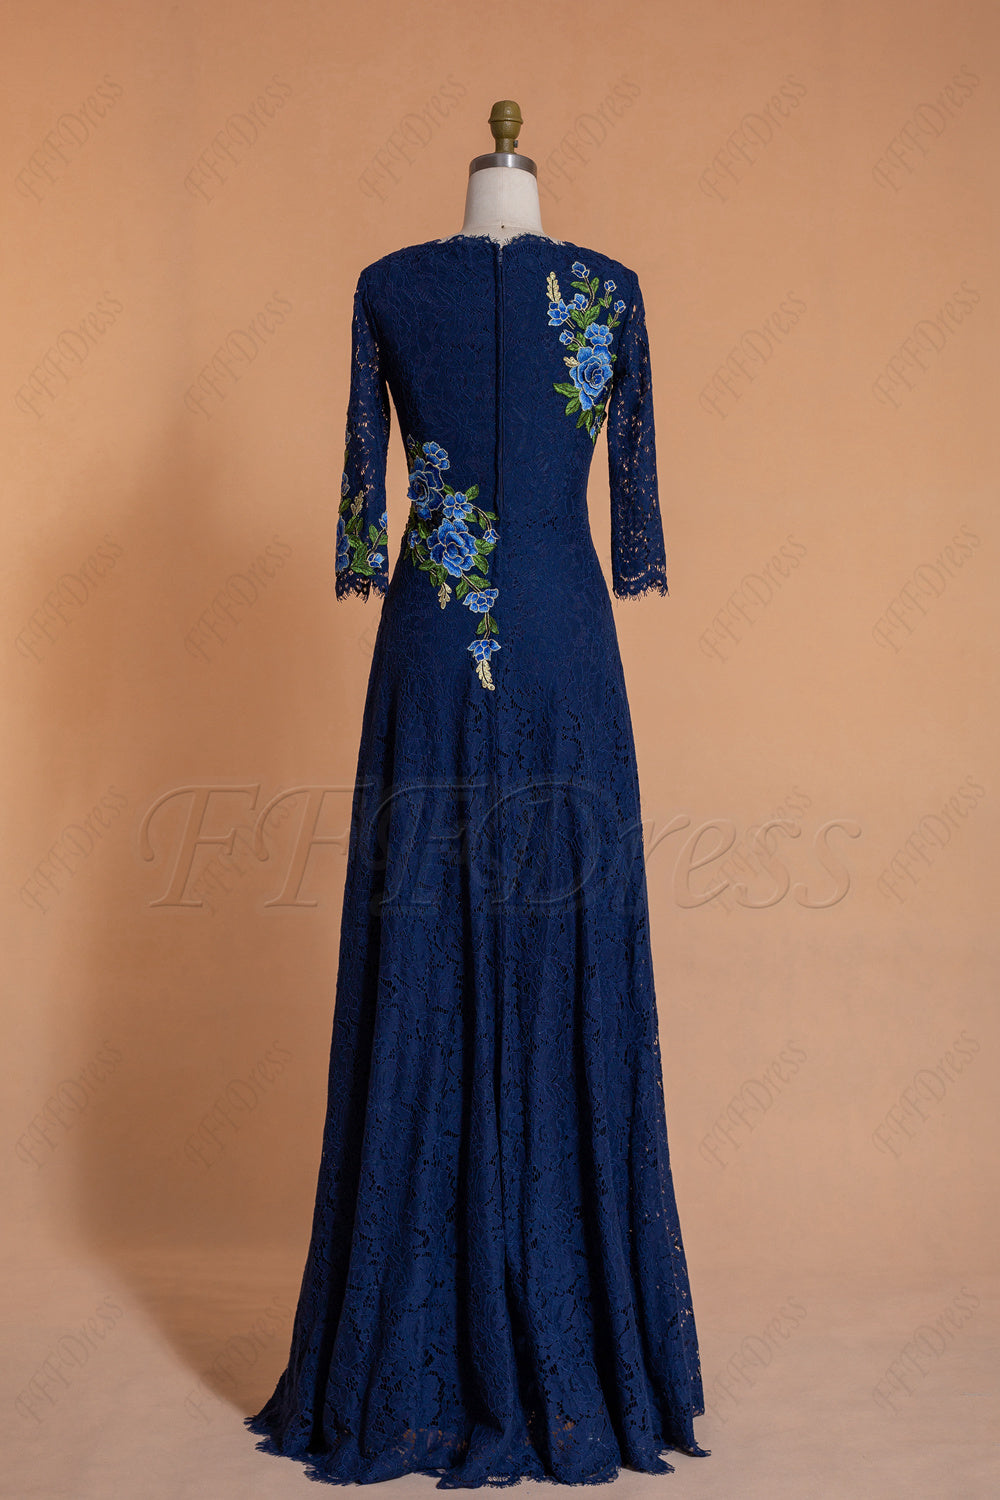 Modest Lace Navy Blue Bridesmaid Dresses 3/4 Sleeves with embroidery